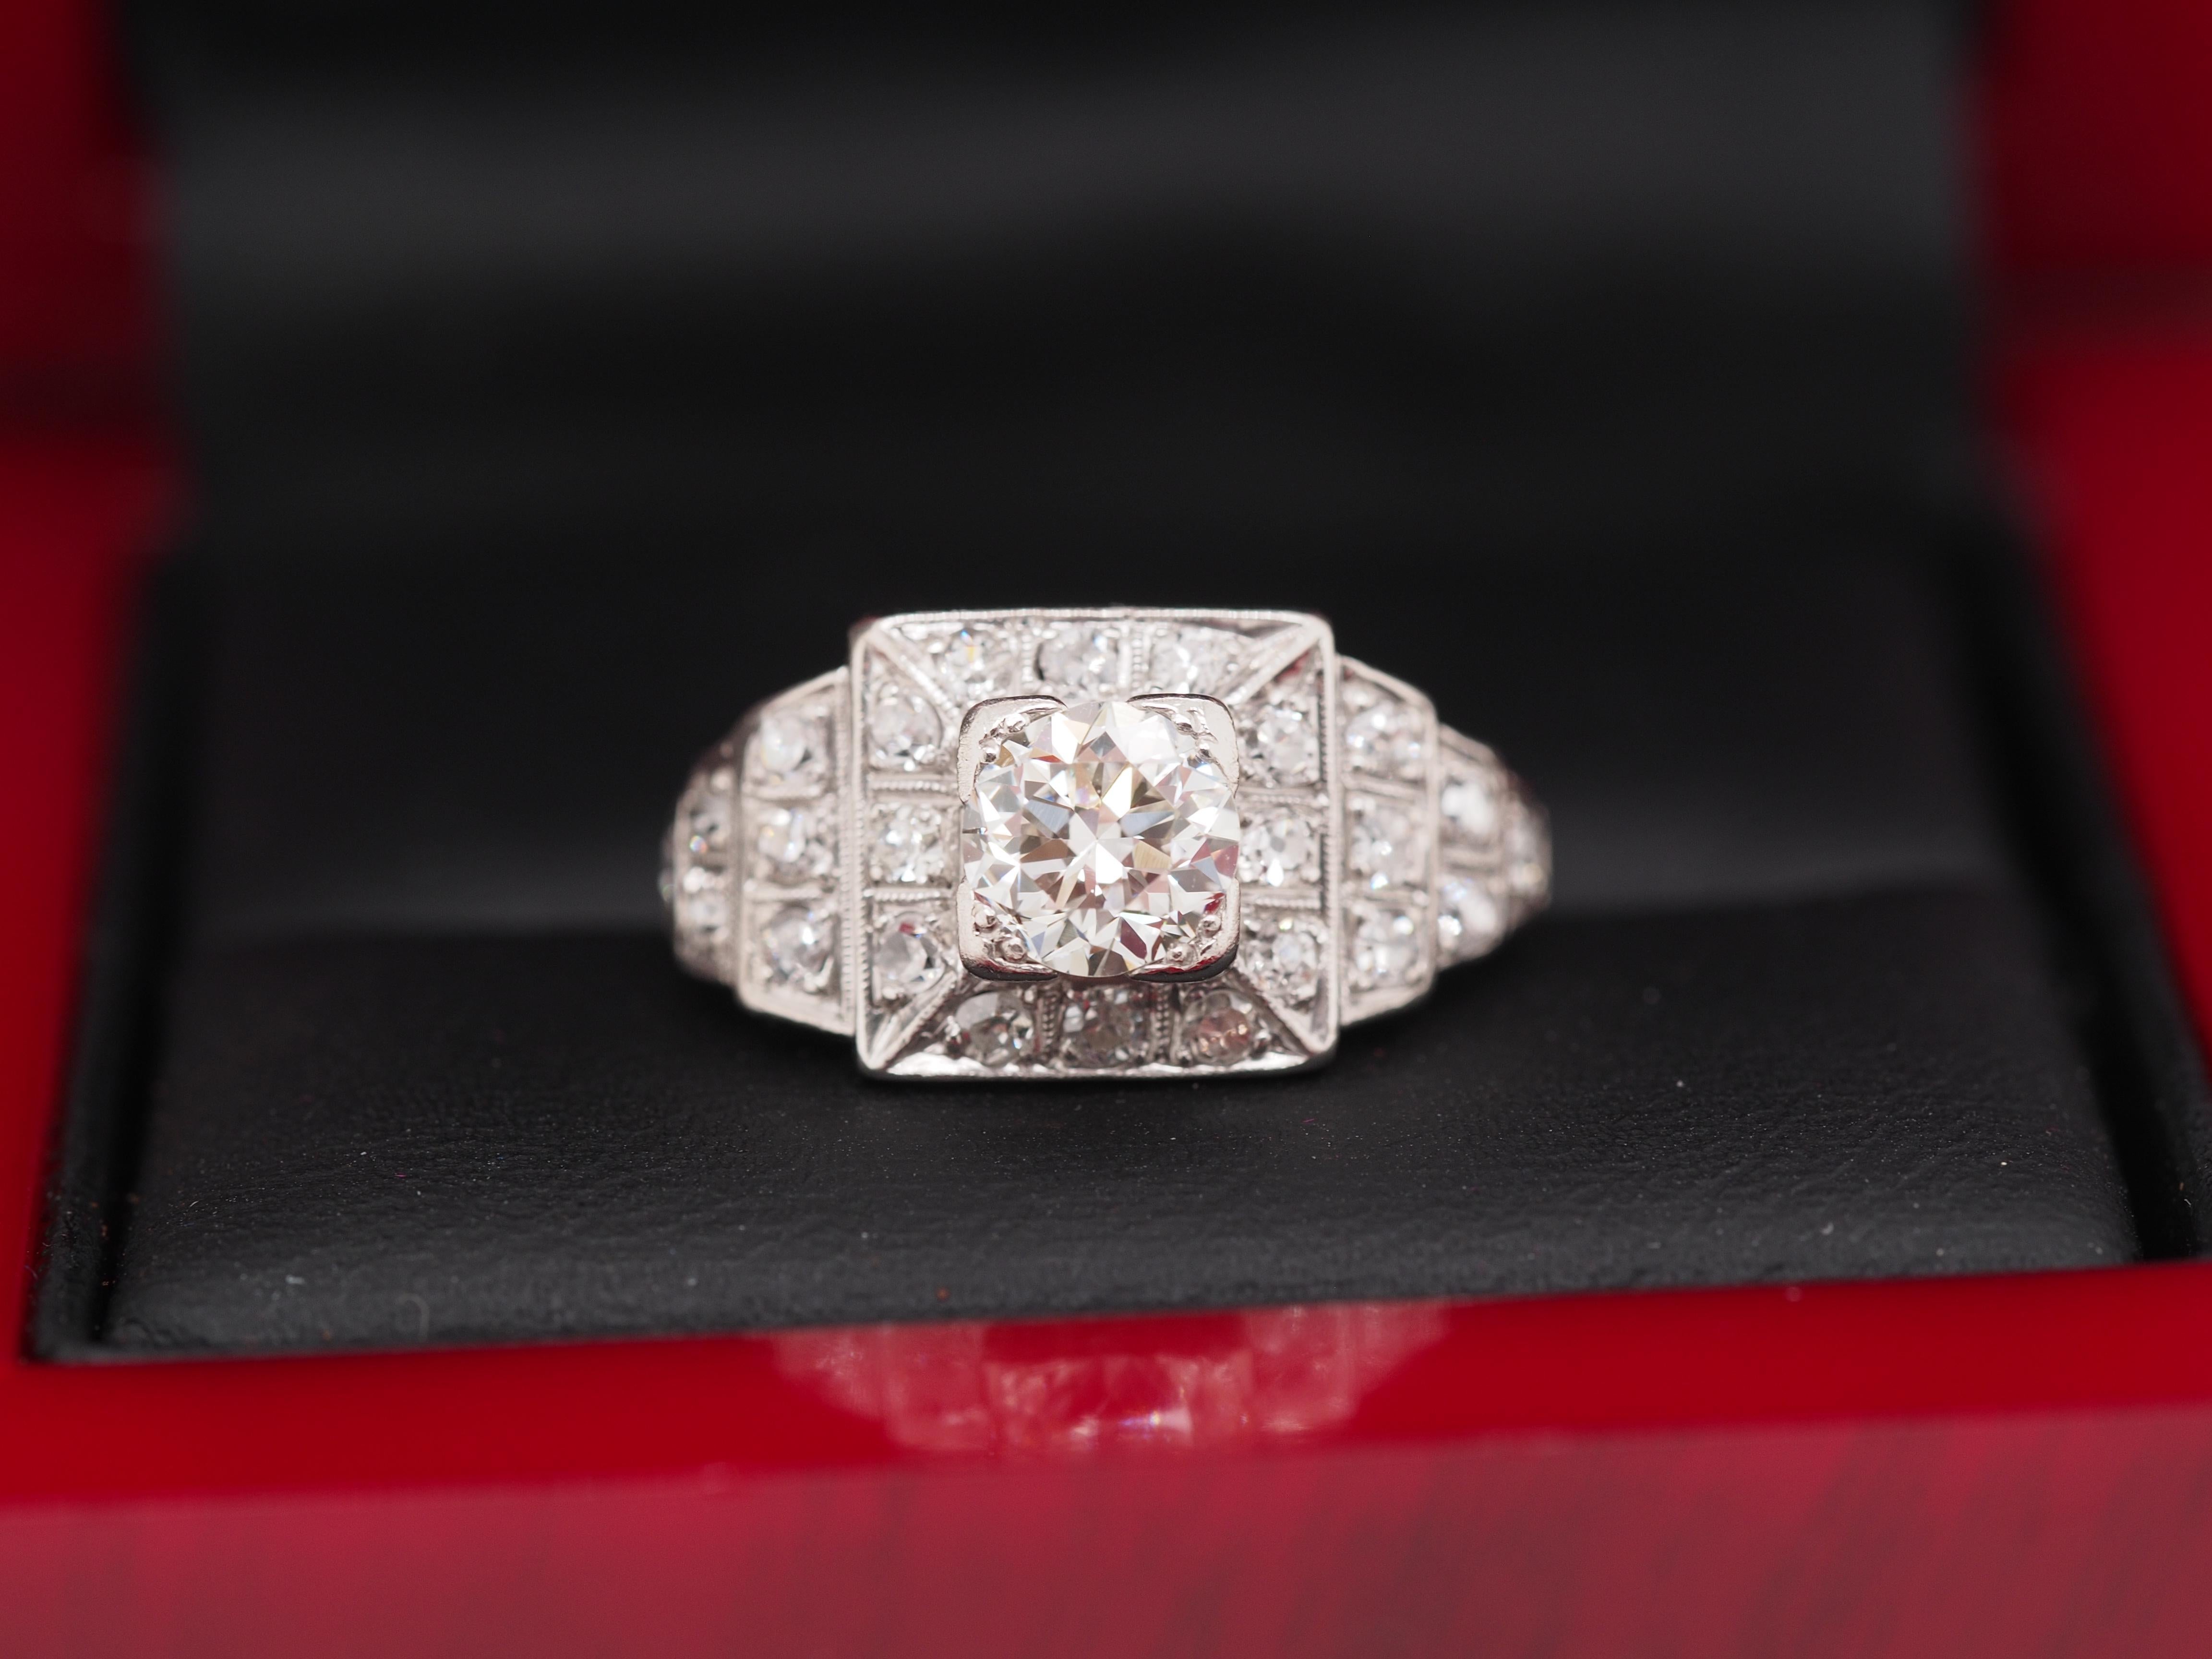 Year: 1920

Item Details:
Ring Size: 3.25
Metal Type: Platinum [Hallmarked, and Tested]
Weight: 3.7 grams

Diamond Details

Center Diamond:

Natural Diamond, Old European Cut

Weight: .70ct

Color: G

Clarity: VS

‌

Side Diamonds: .20ct total